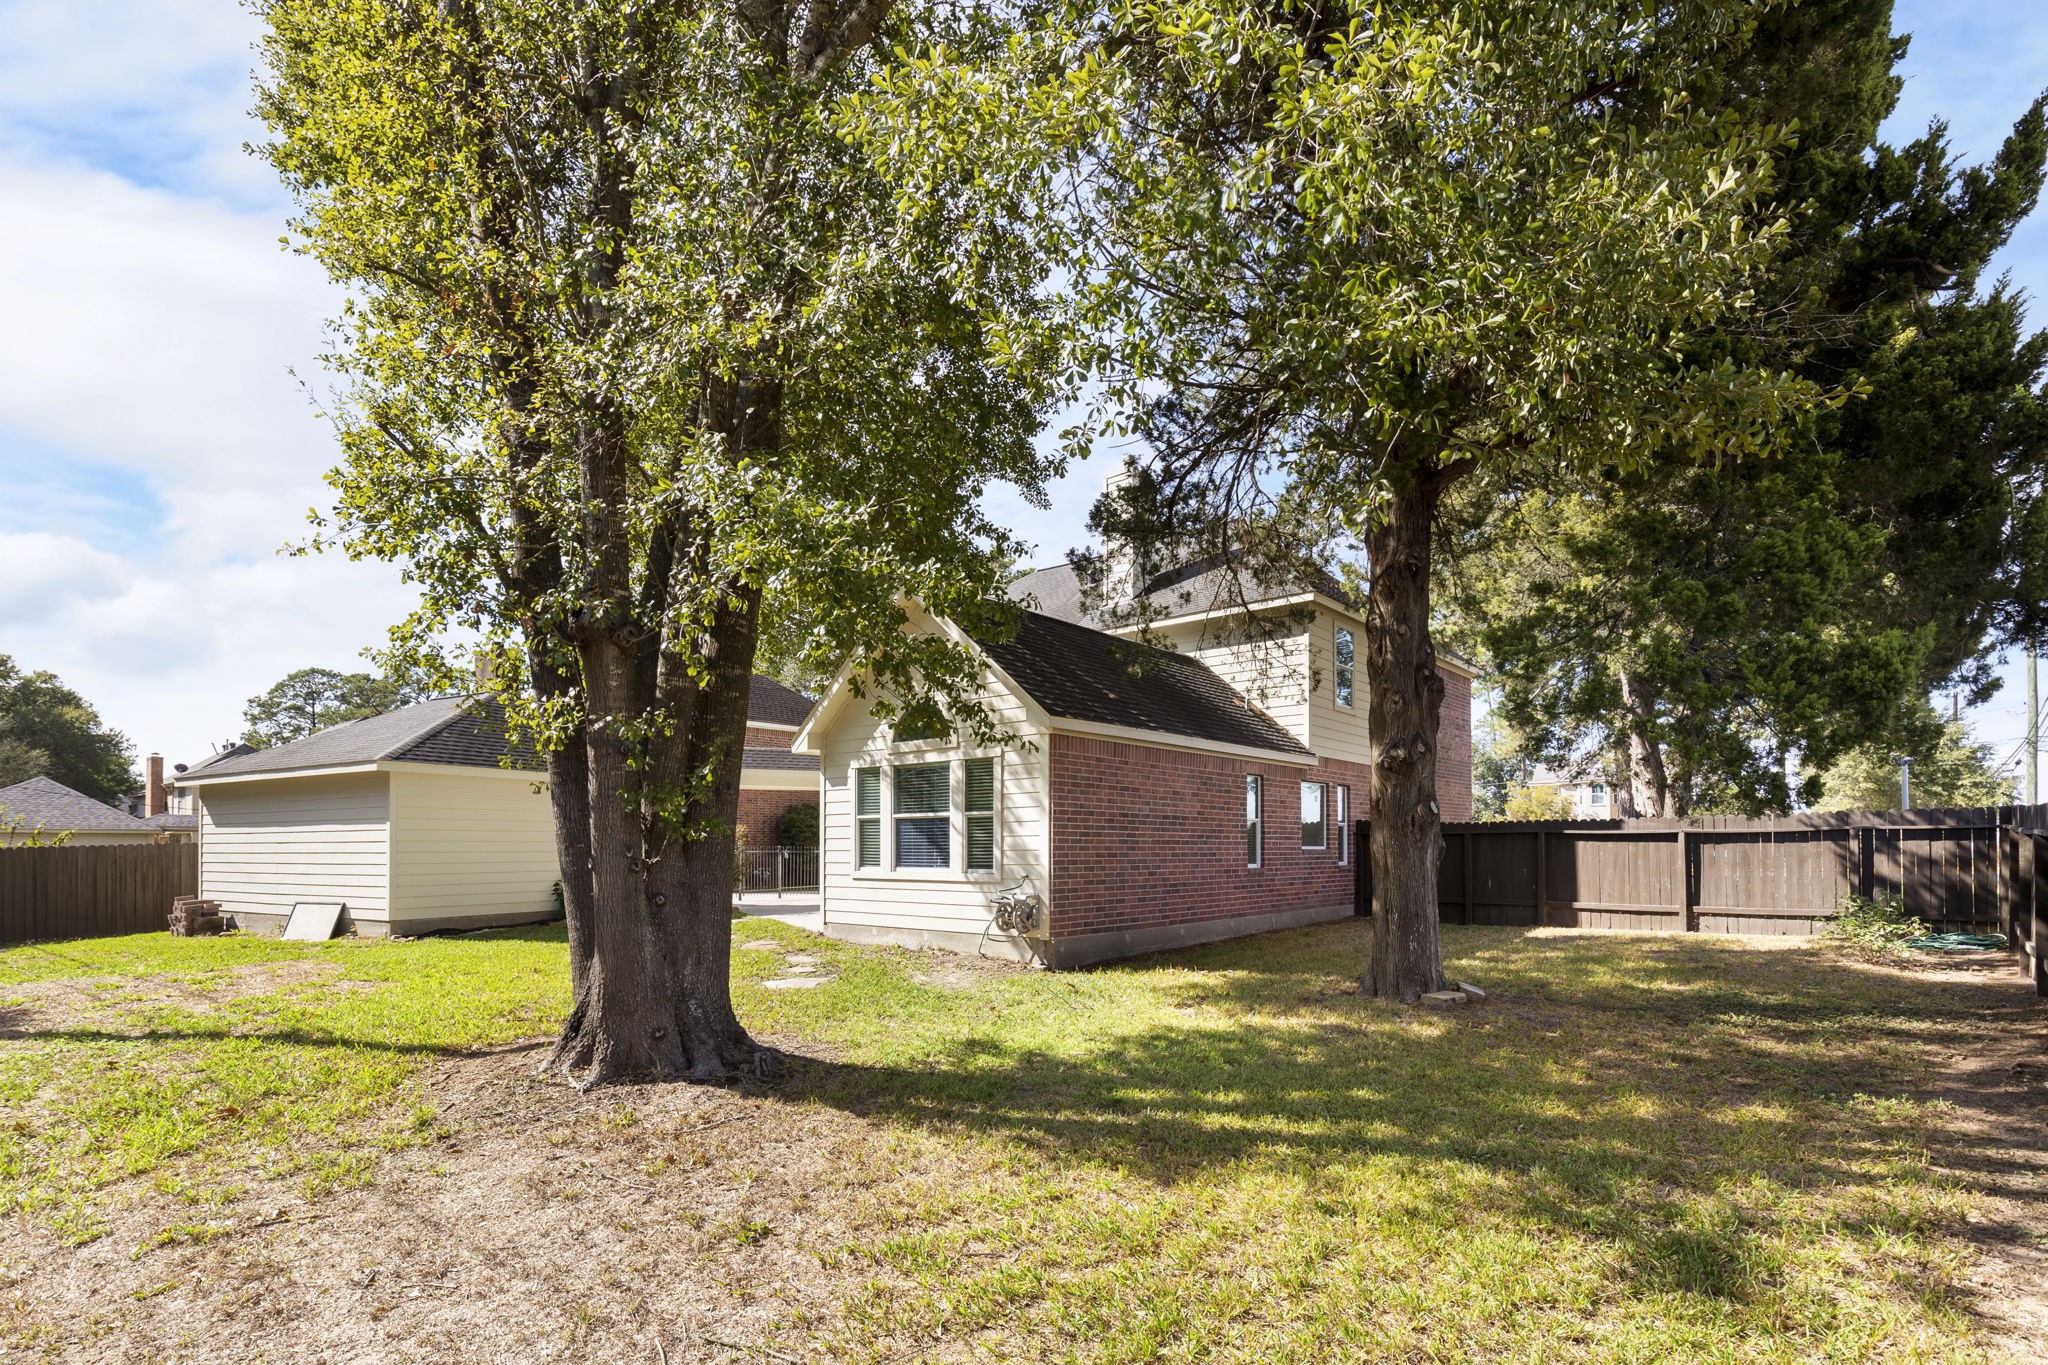 Enjoy the mature trees and large backyard!